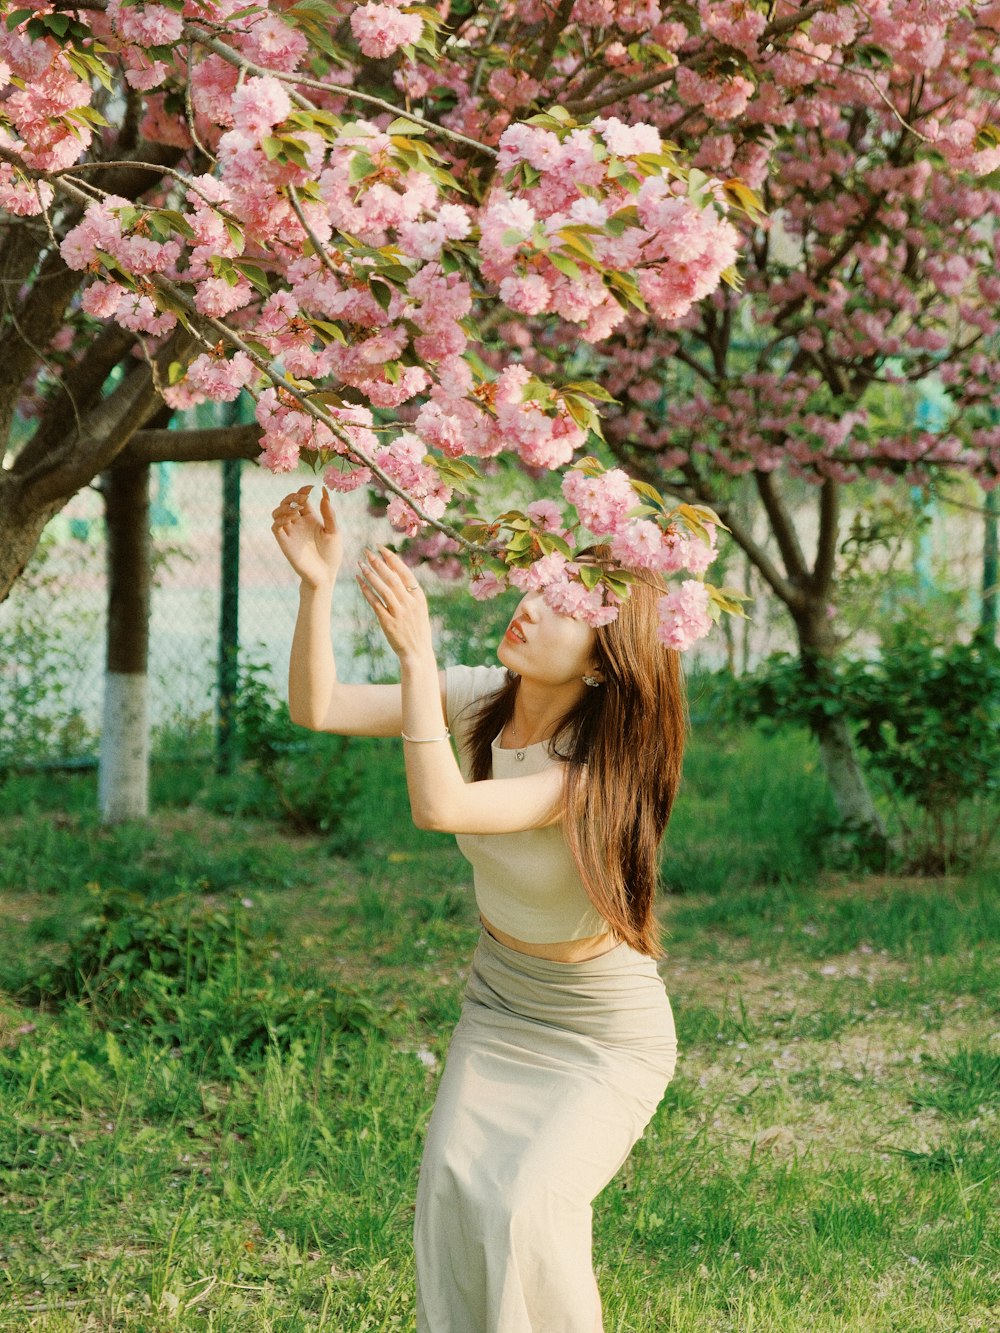 a woman is standing under a tree with pink flowers